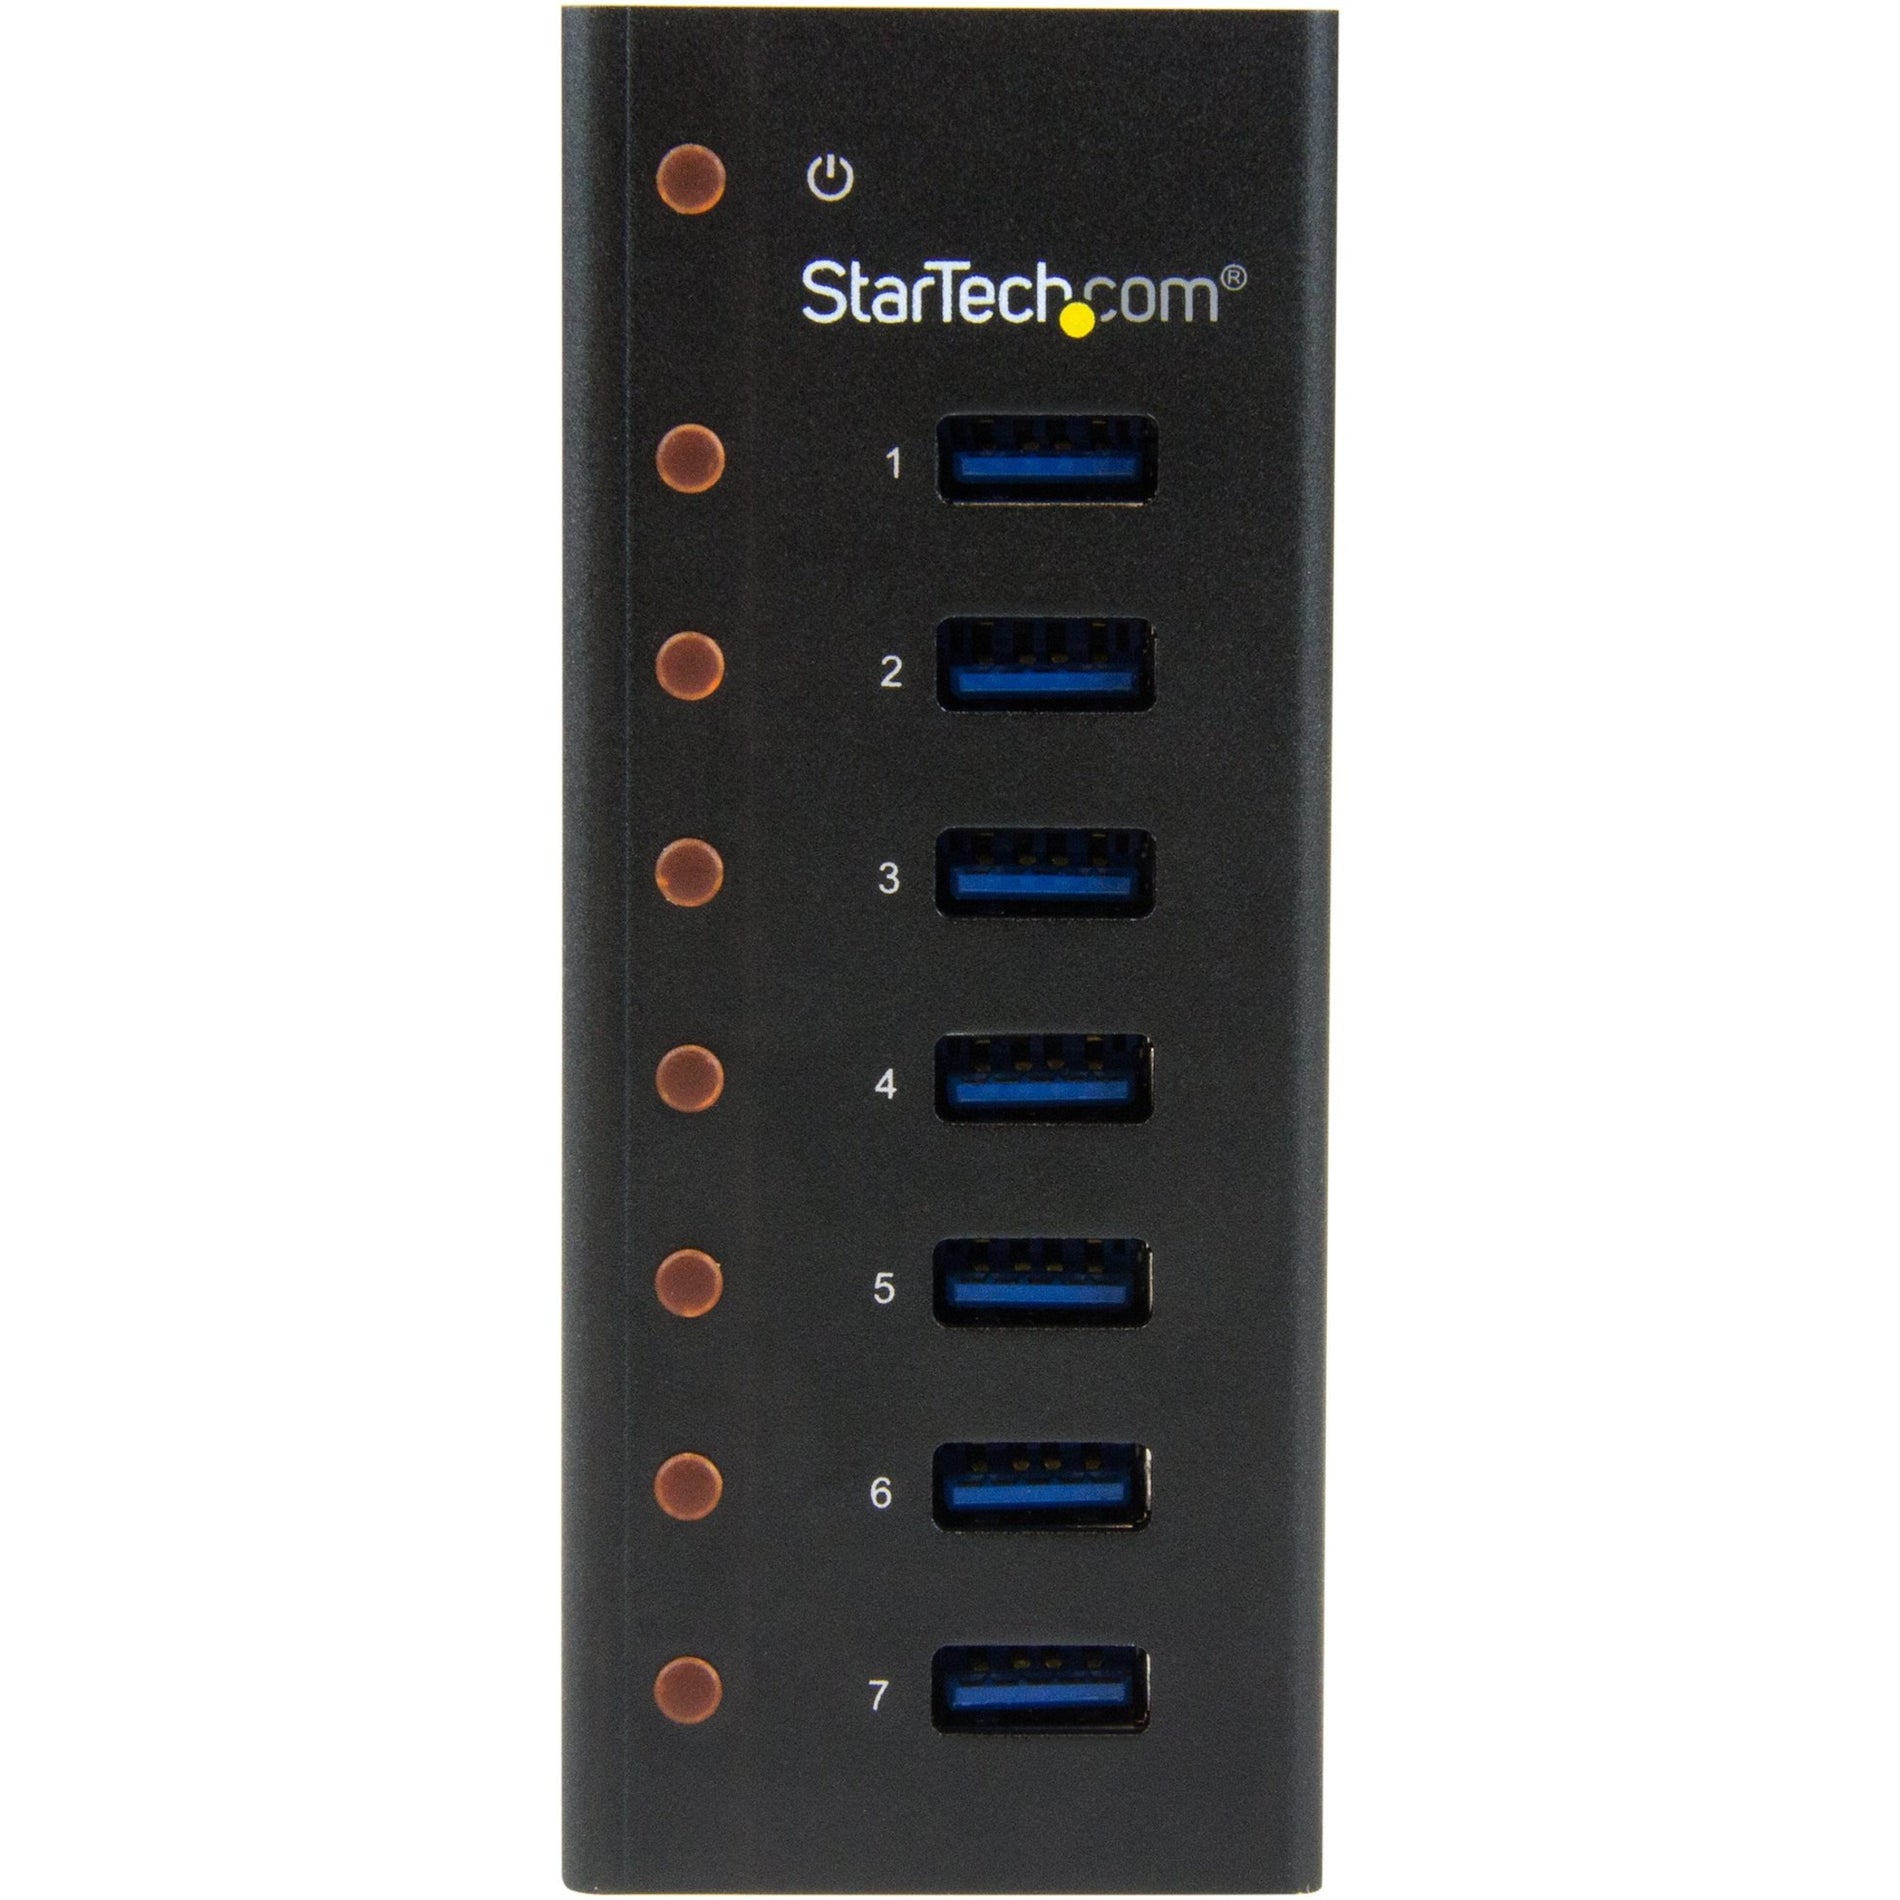 StarTech.com ST7300U3M 7 Port USB 3.0 Hub - Connect 7 High-Performance Devices to Your Computer or Mac